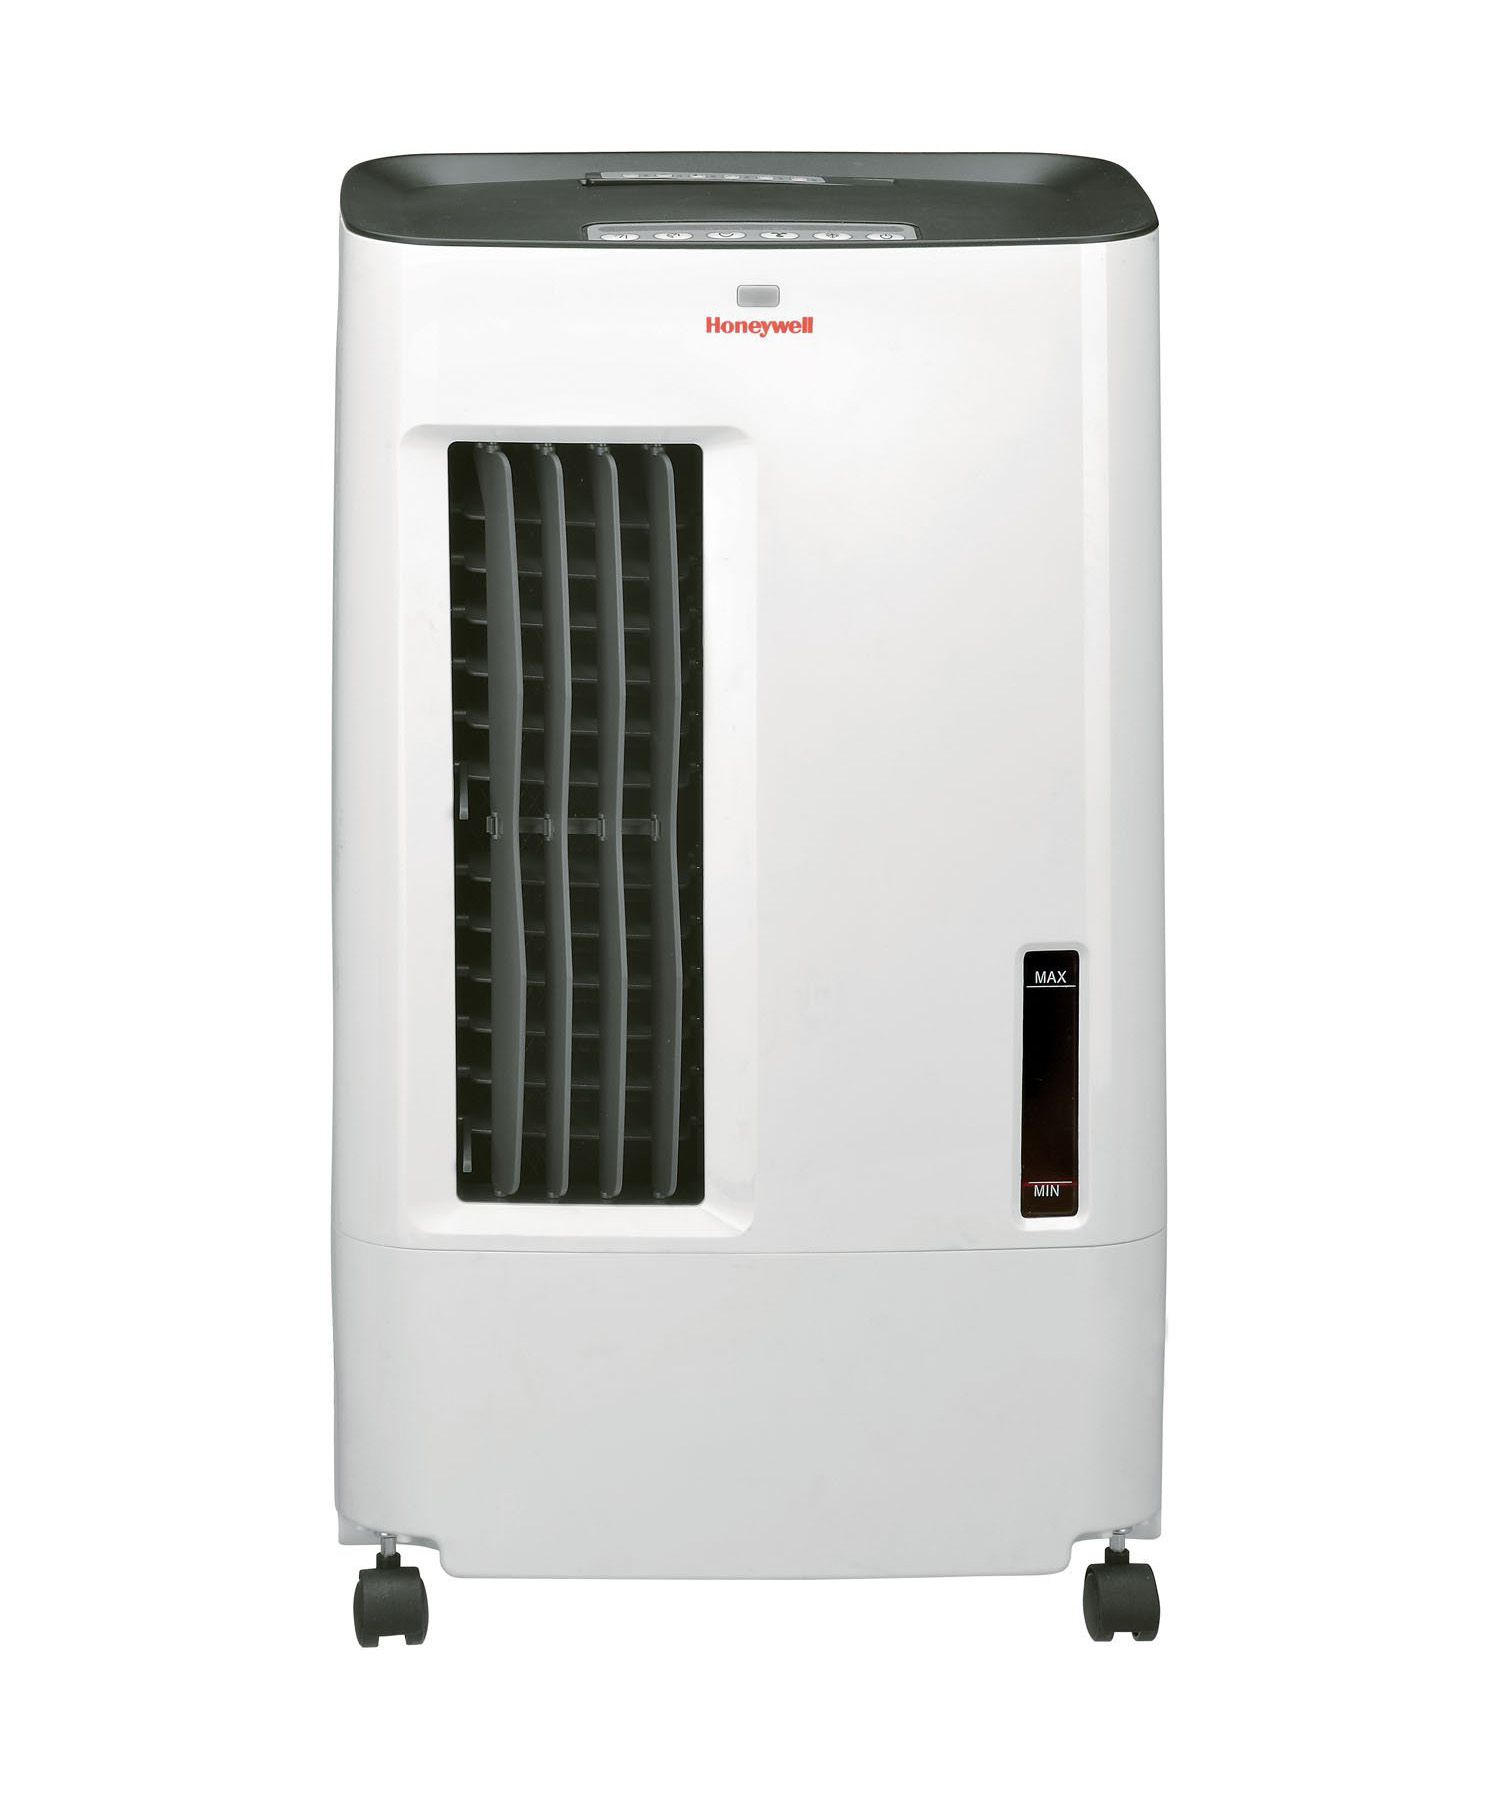 Honeywell Compact Cooler and Humidifier